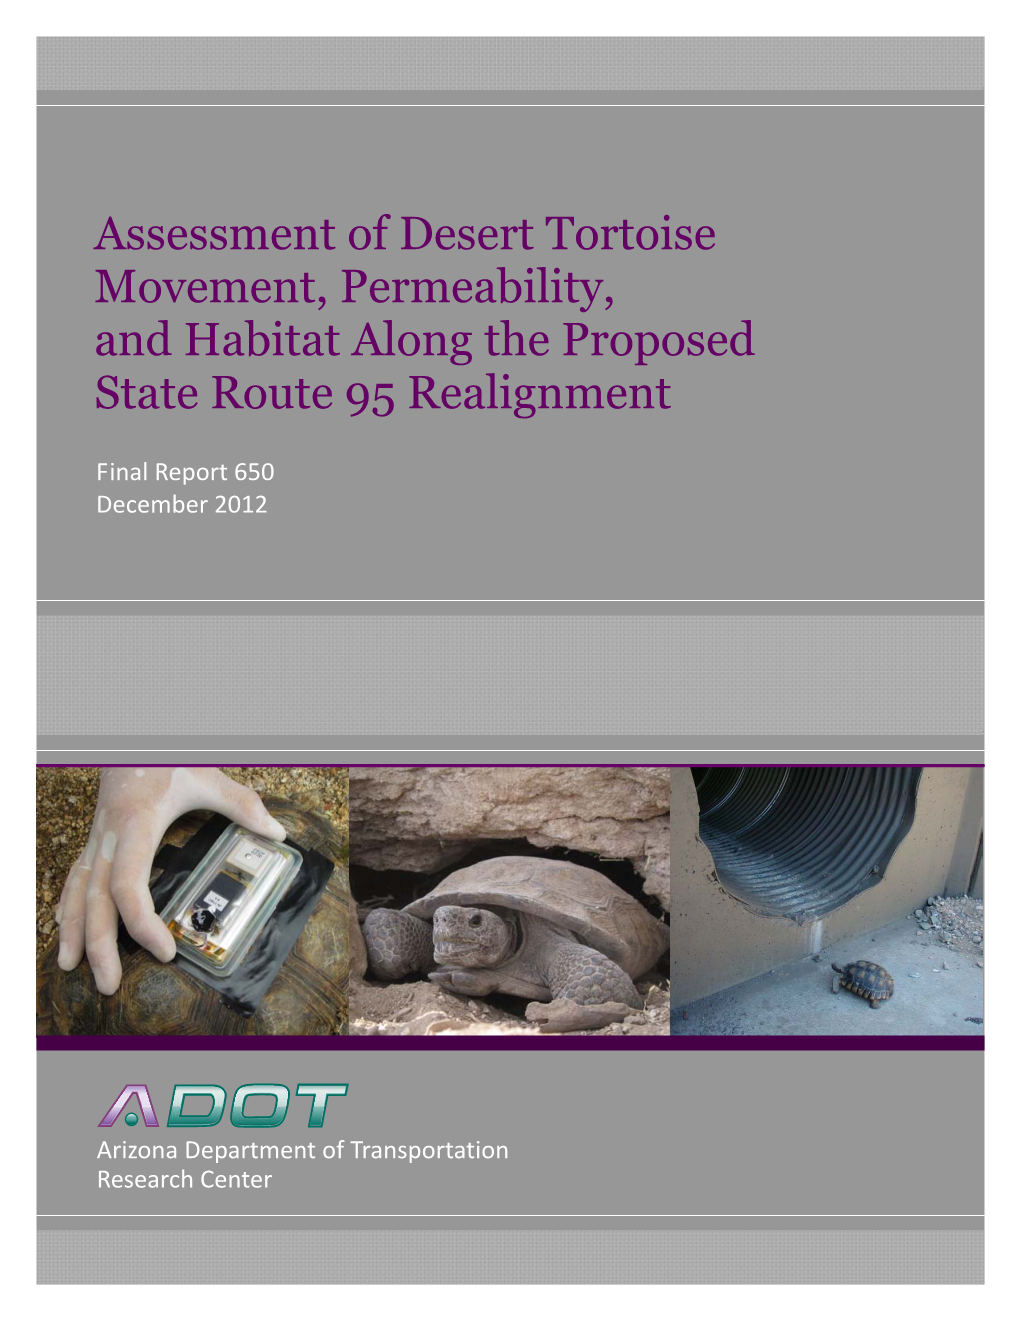 Assessment of Desert Tortoise Movement, Permeability, and Habitat Along the Proposed State Route 95 Realignment